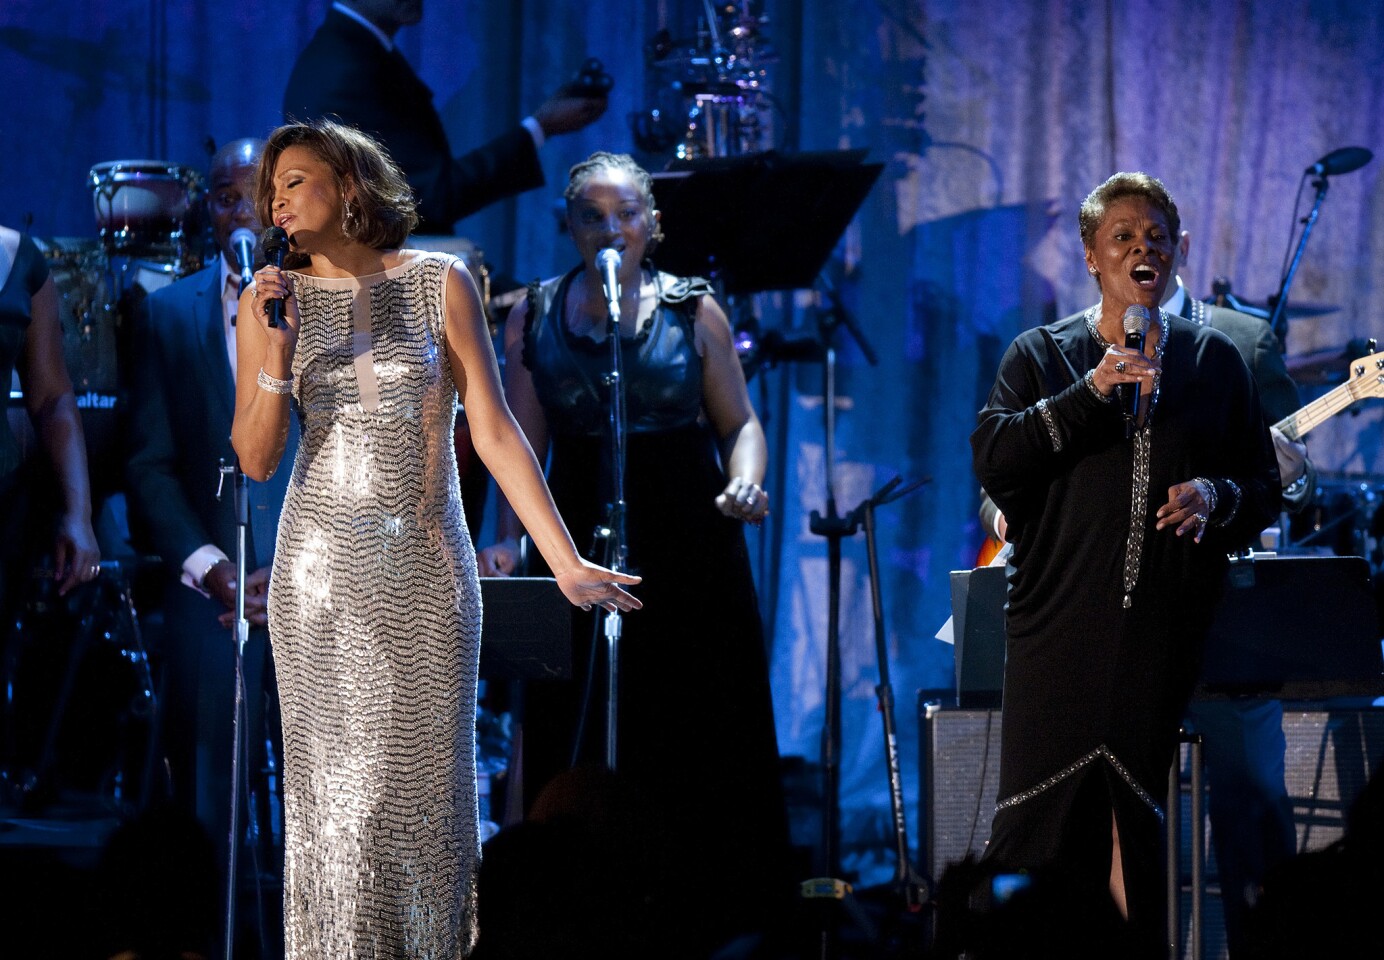 Whitney Houston and Dionne Warwick sing "That's What Friends Are For" at the 2011 Clive Davis pre-Grammy gala at the Beverly Hilton hotel.